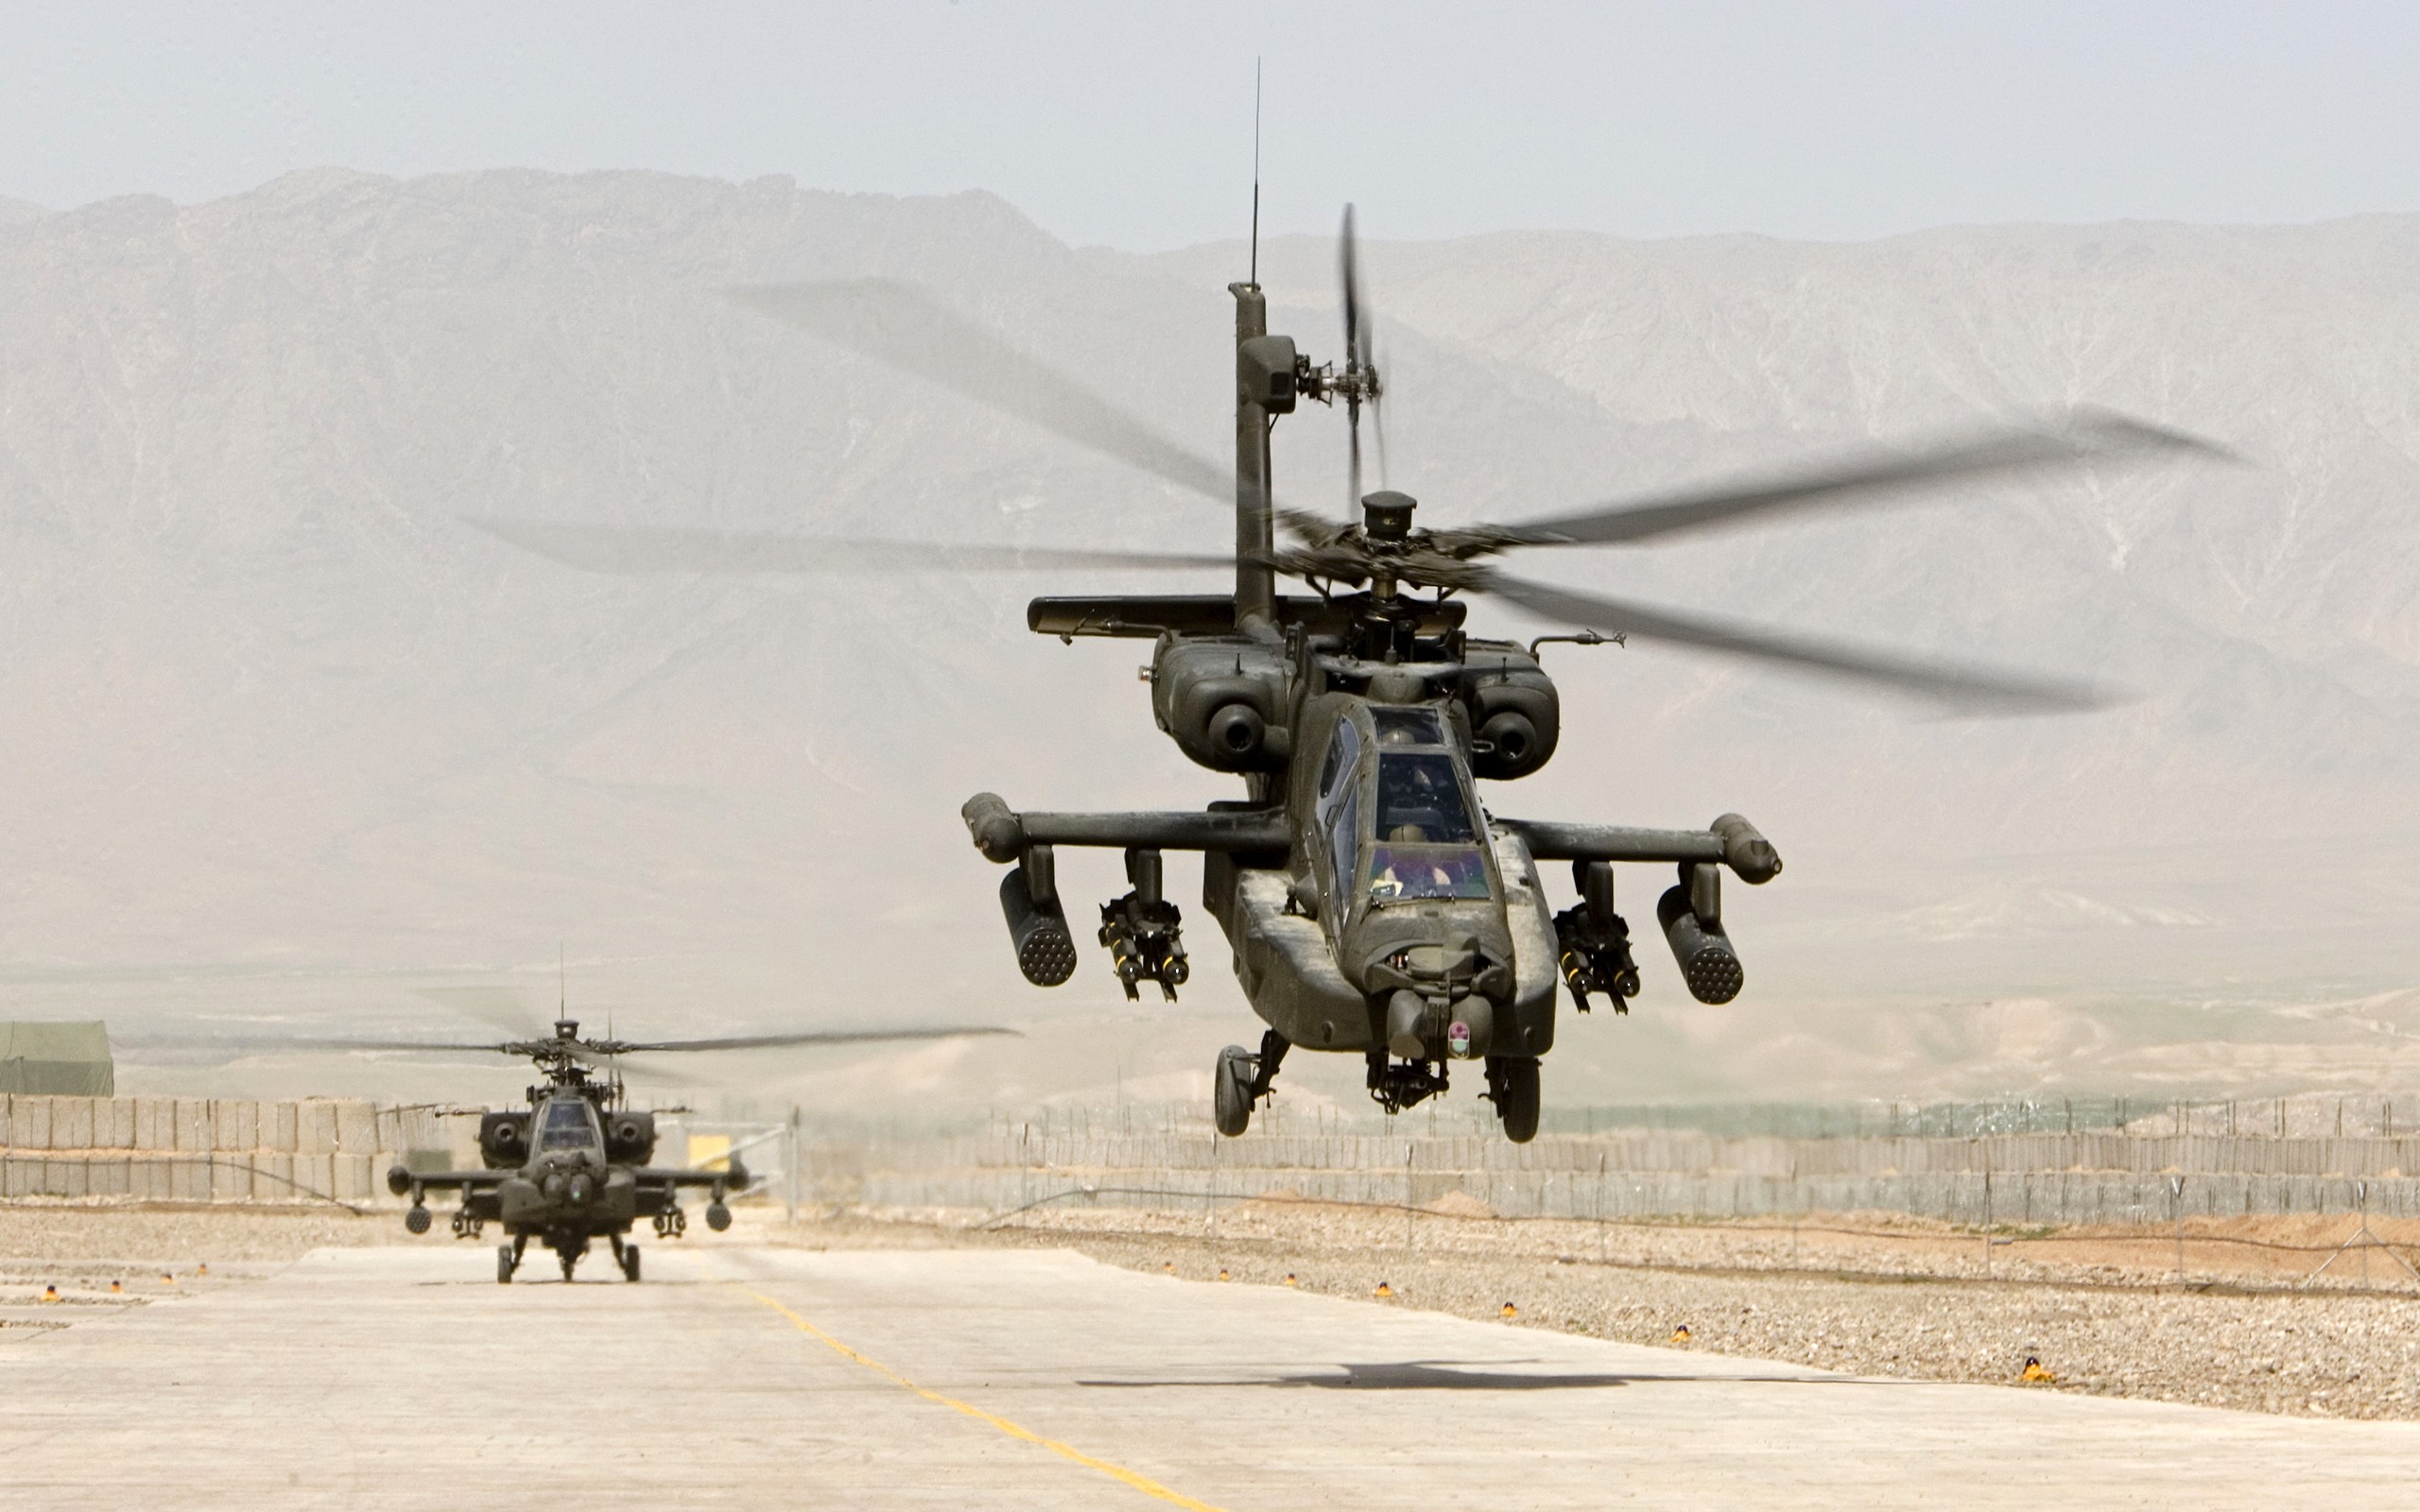 Boeing AH 64 Apache, Helicopters, Military Aircraft, Desert Wallpaper